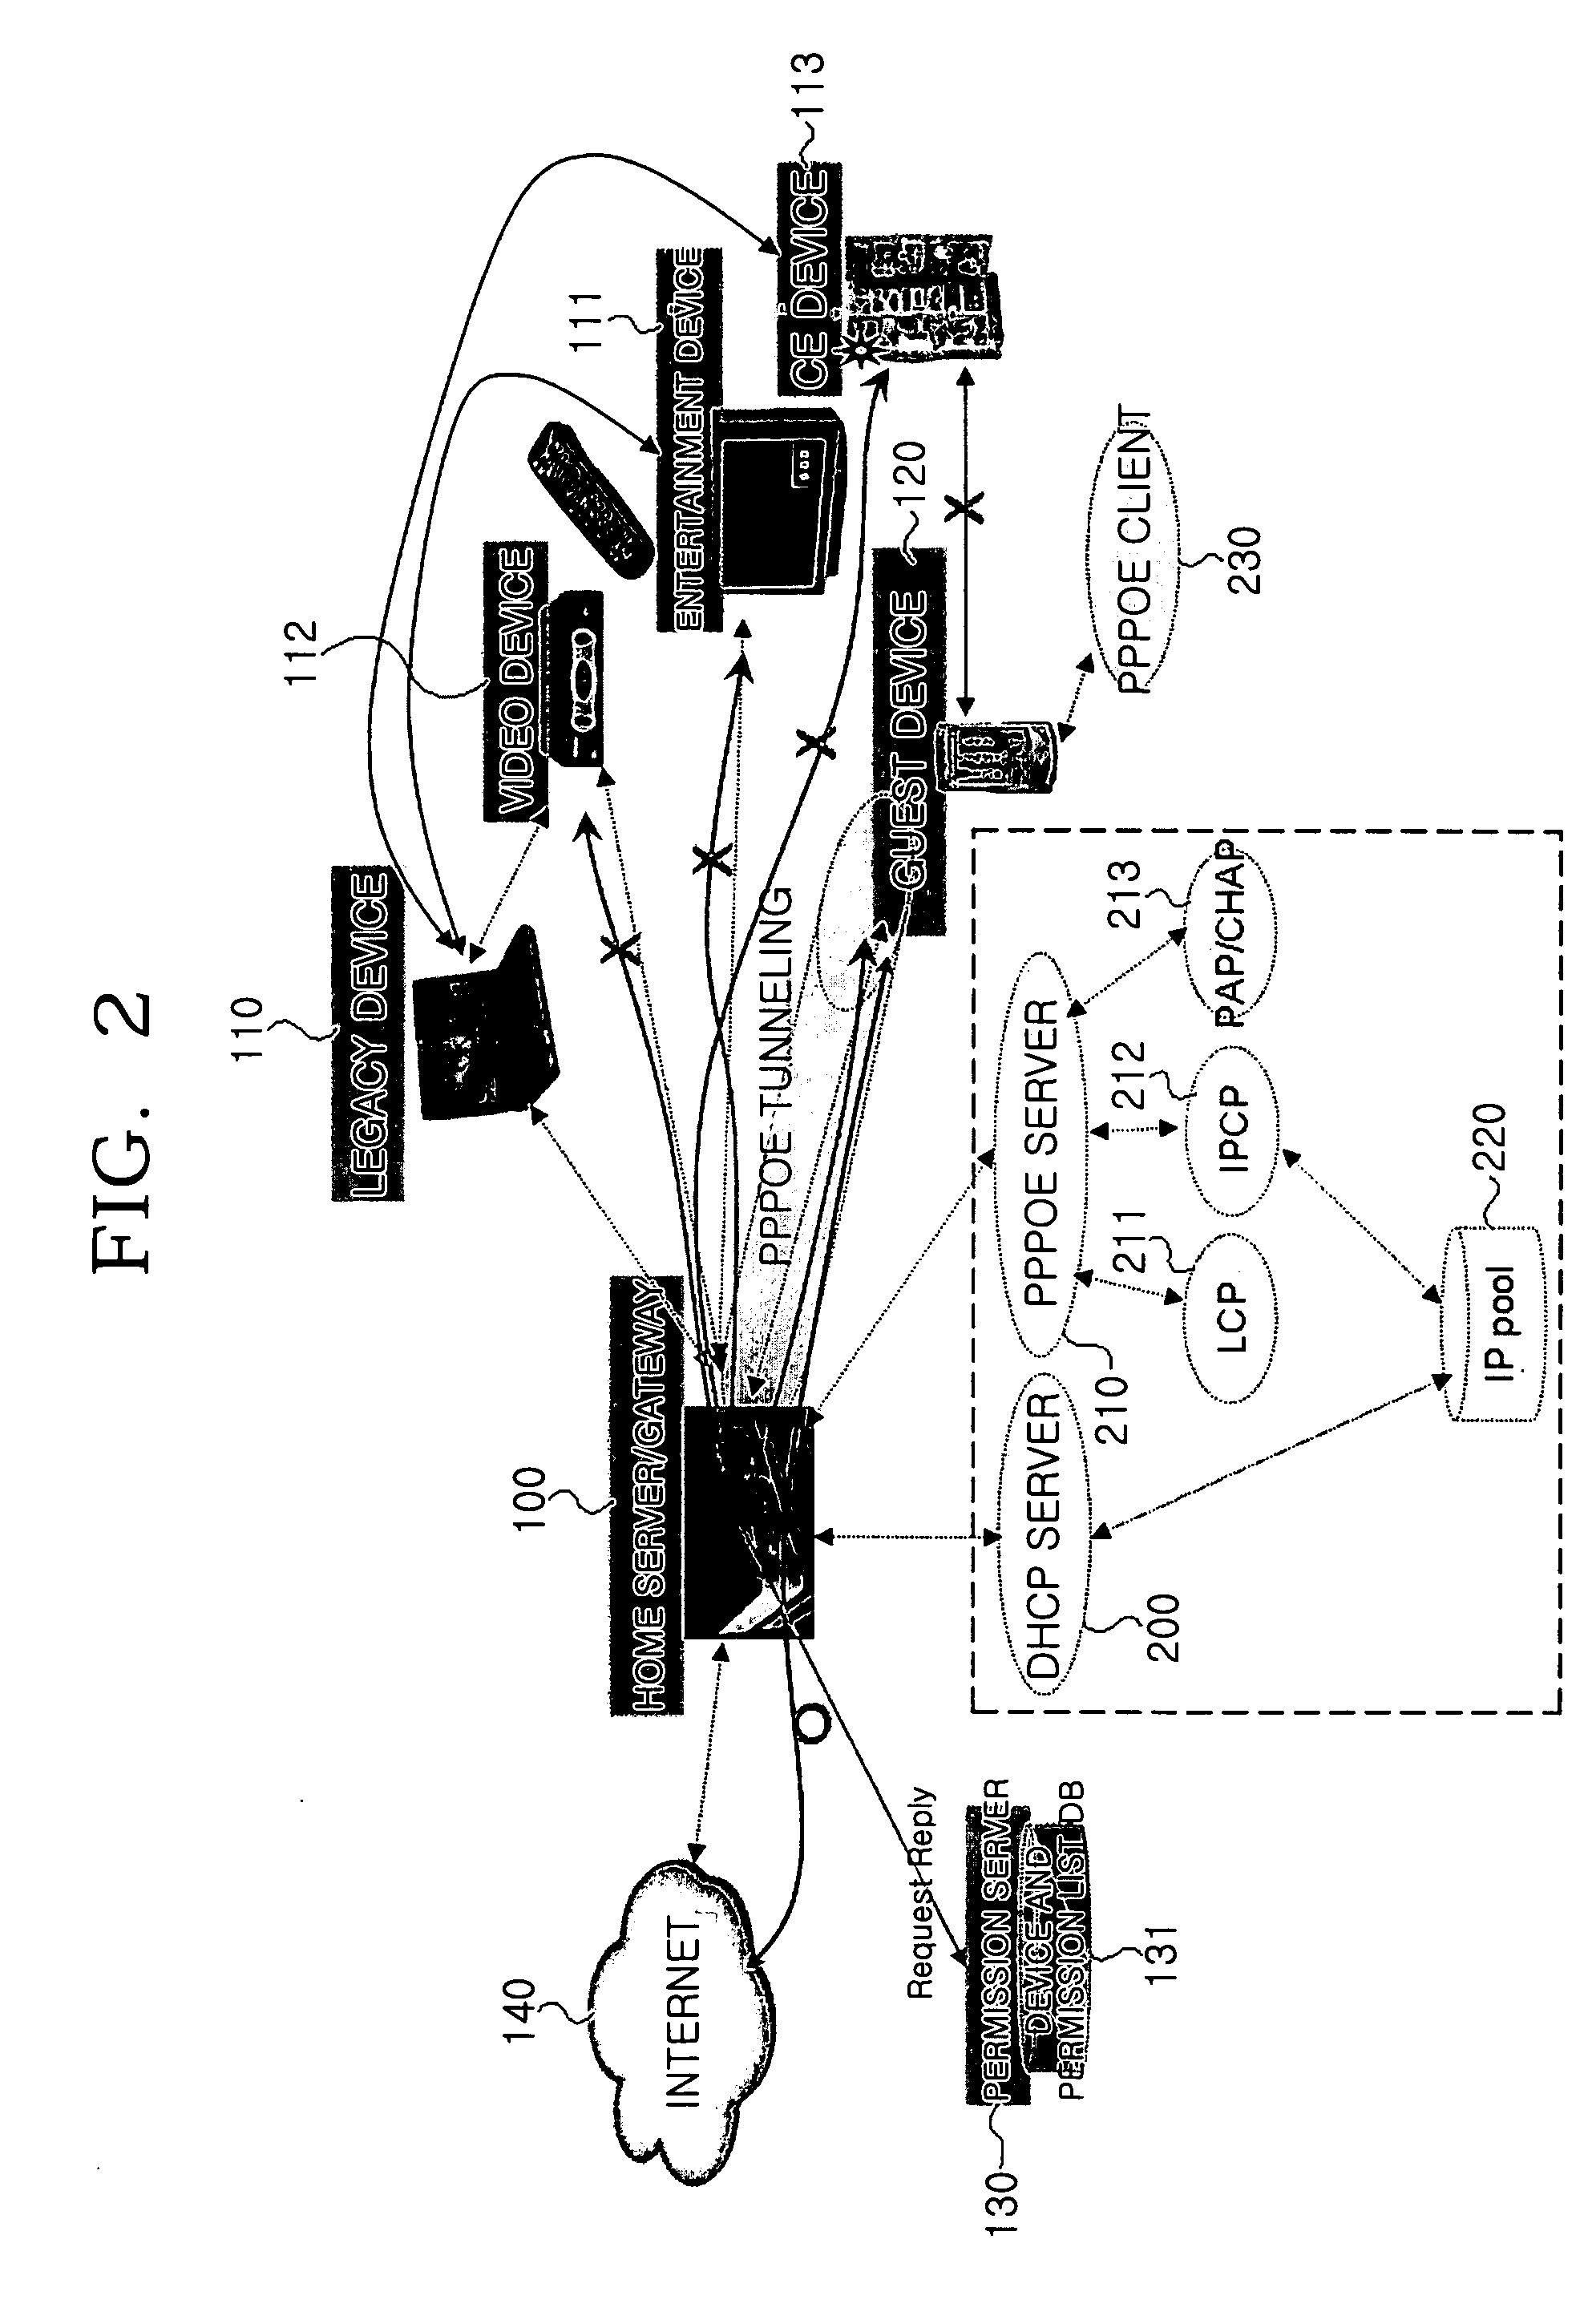 System for and method of authenticating device and user in home network